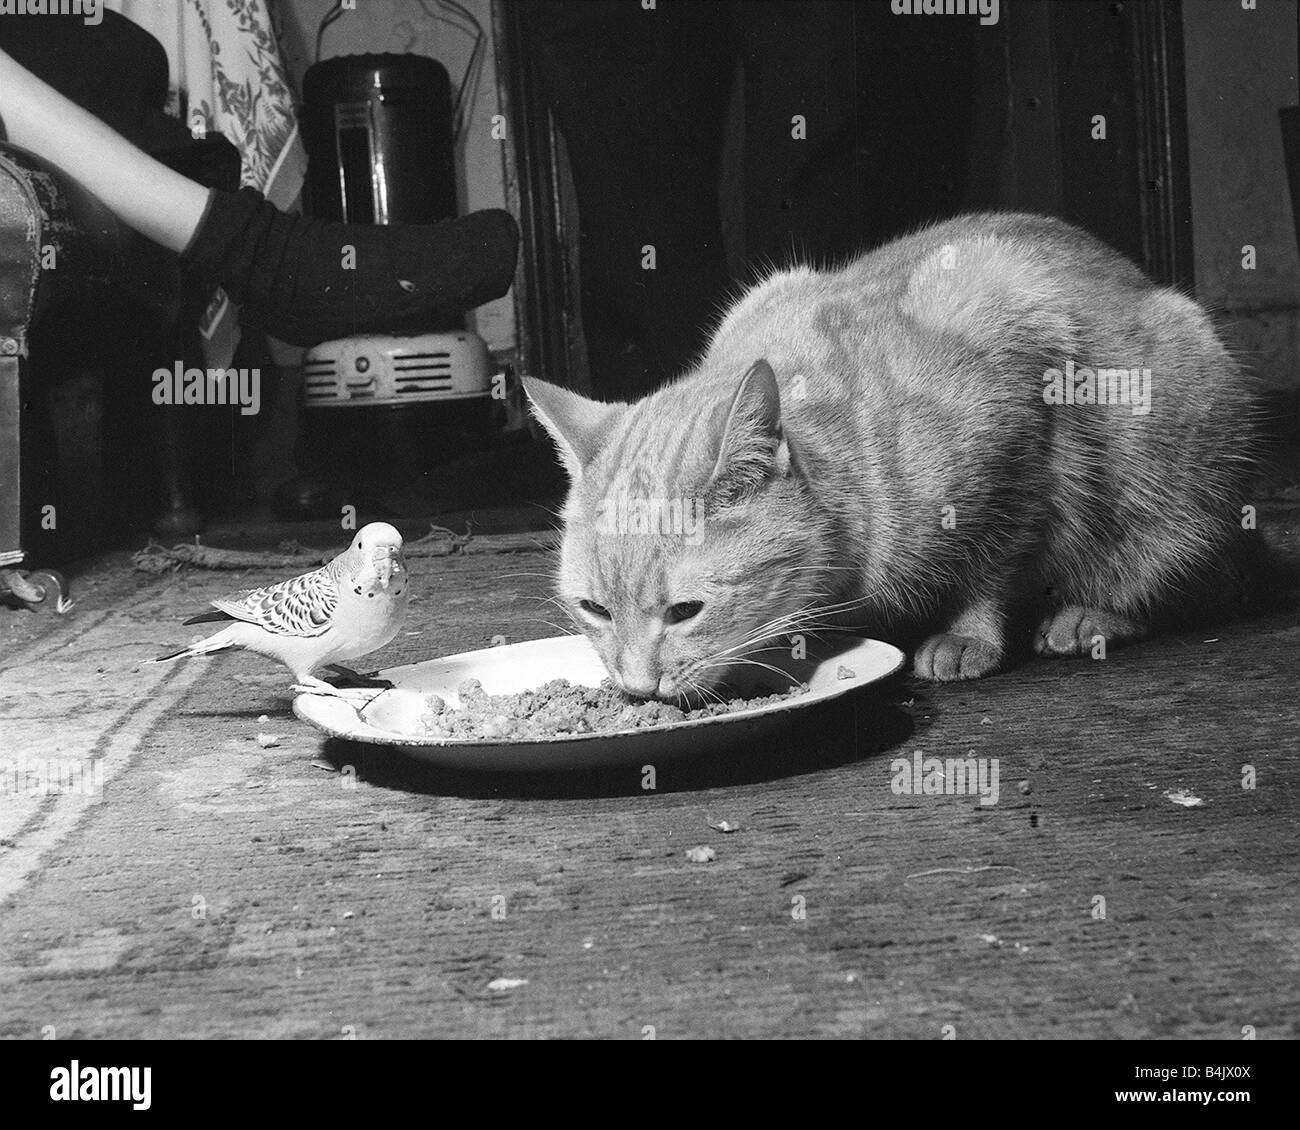 Animals cats and budgie eating from the same plate January 1955 Stock Photo